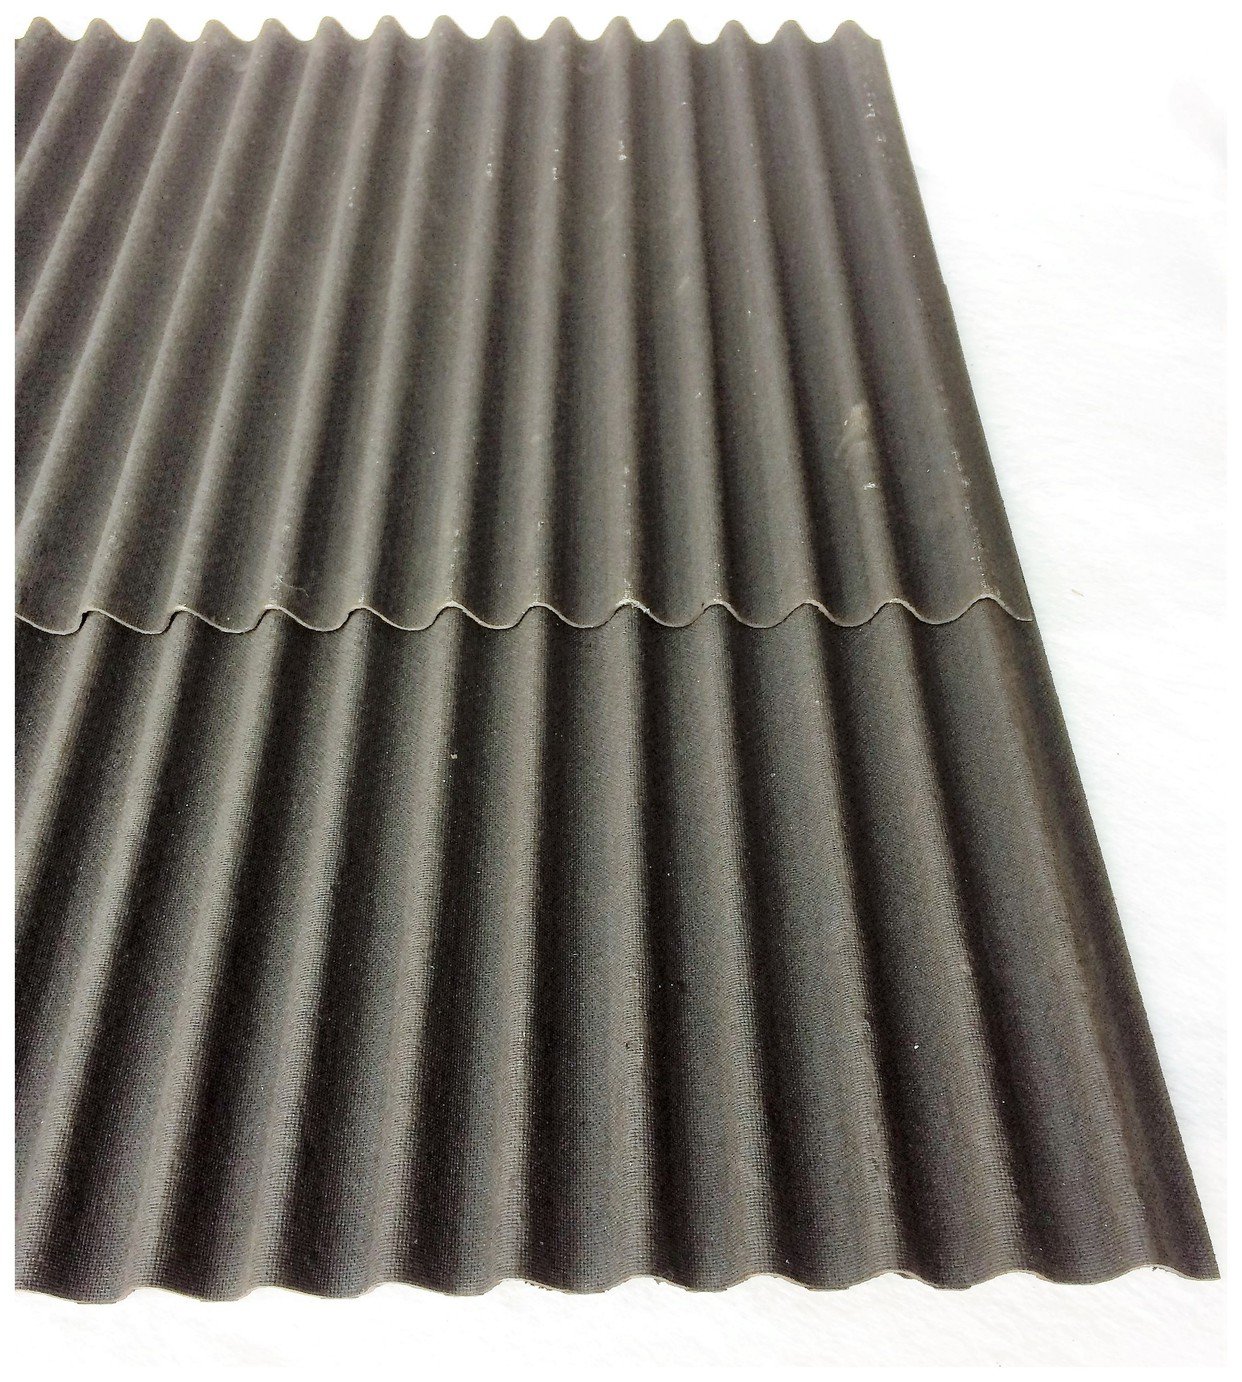 Watershed Bituminous Roofing Kit - 6 x 8ft